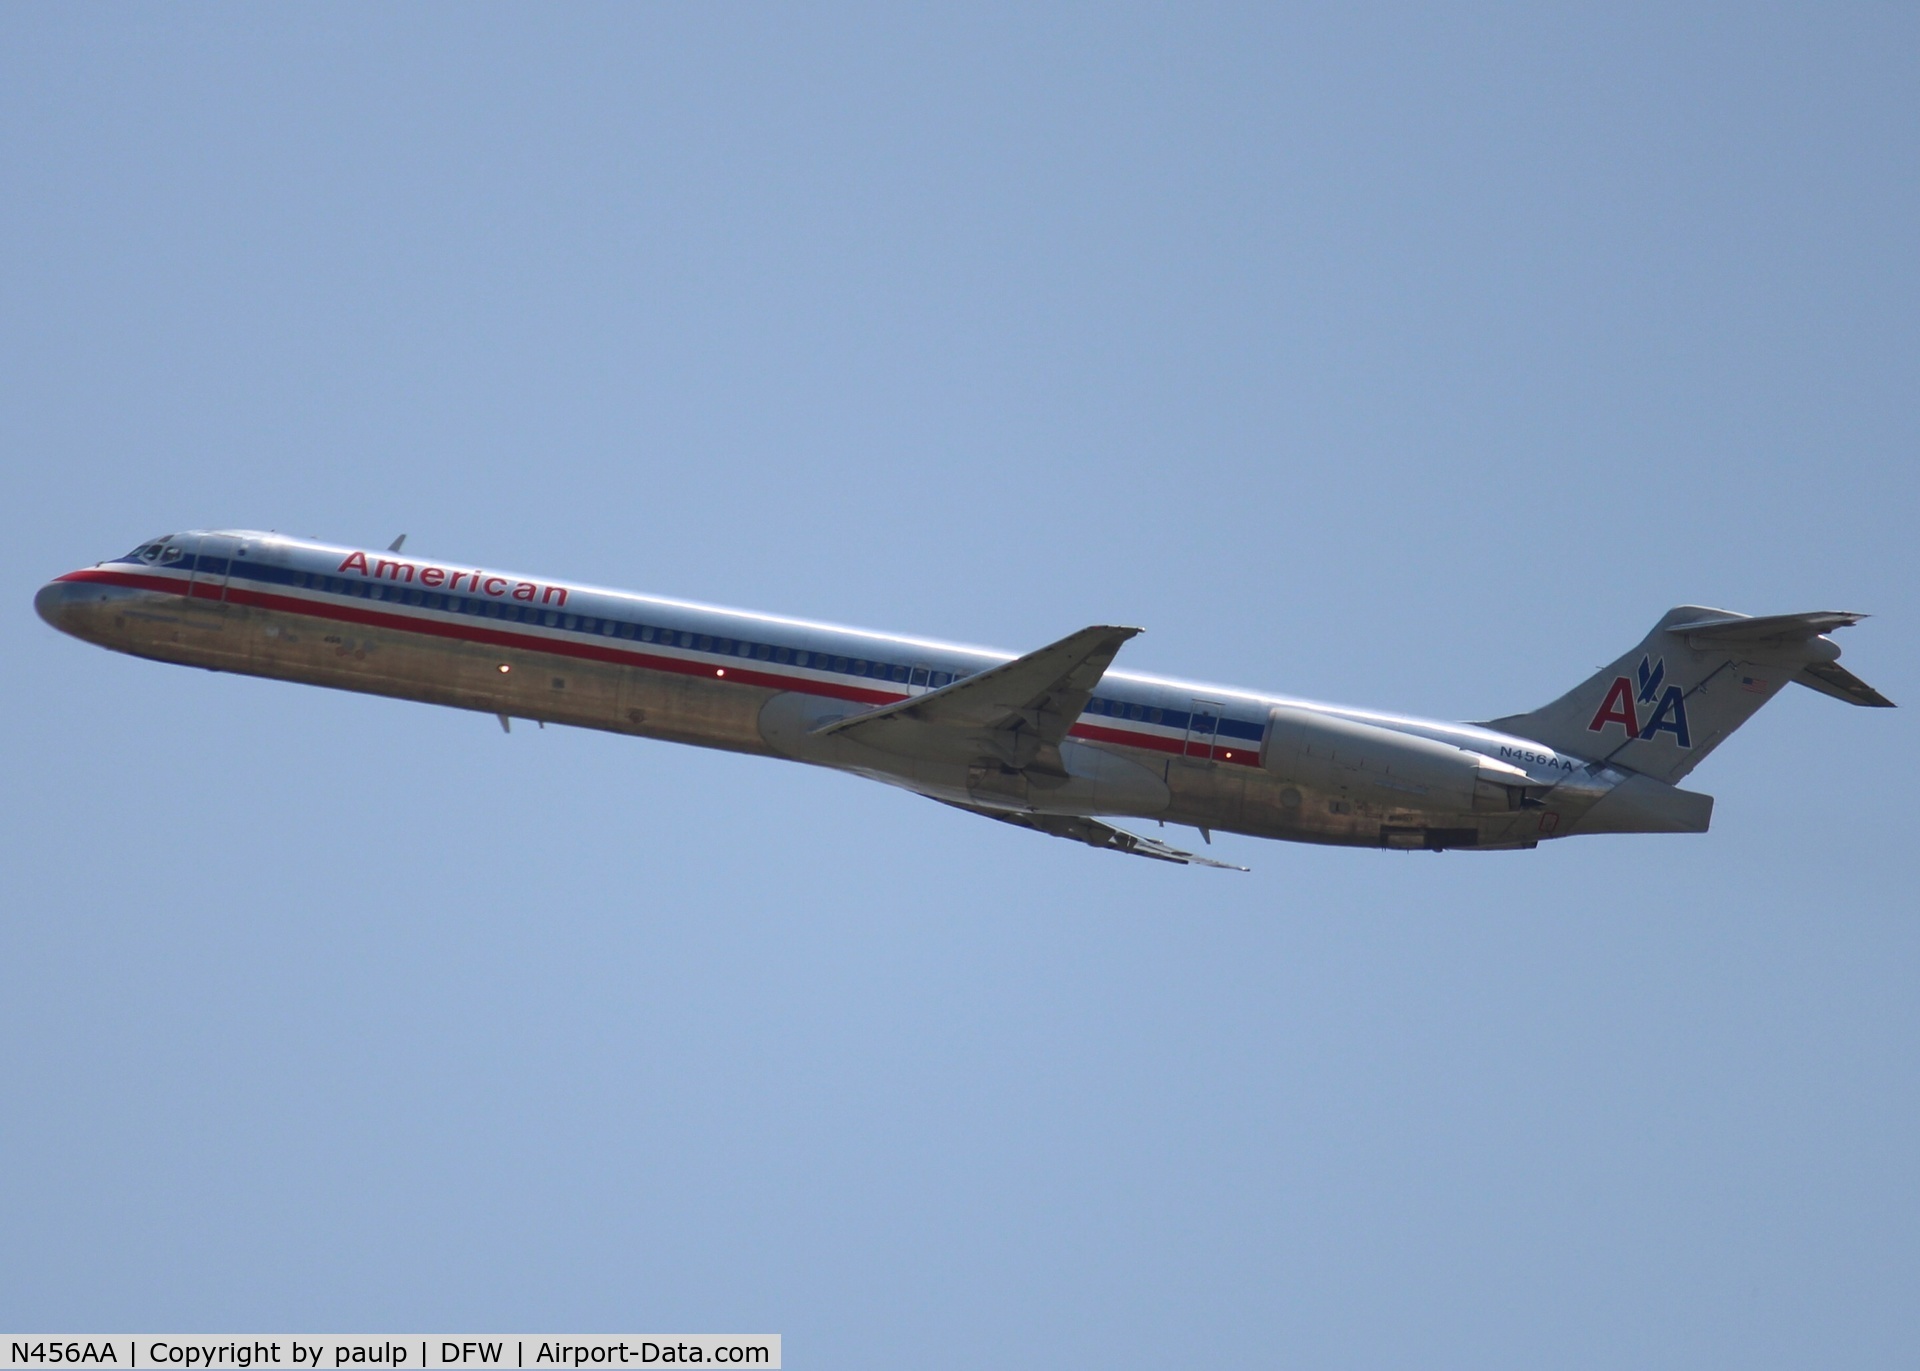 N456AA, 1988 McDonnell Douglas MD-82 (DC-9-82) C/N 49561, At DFW.